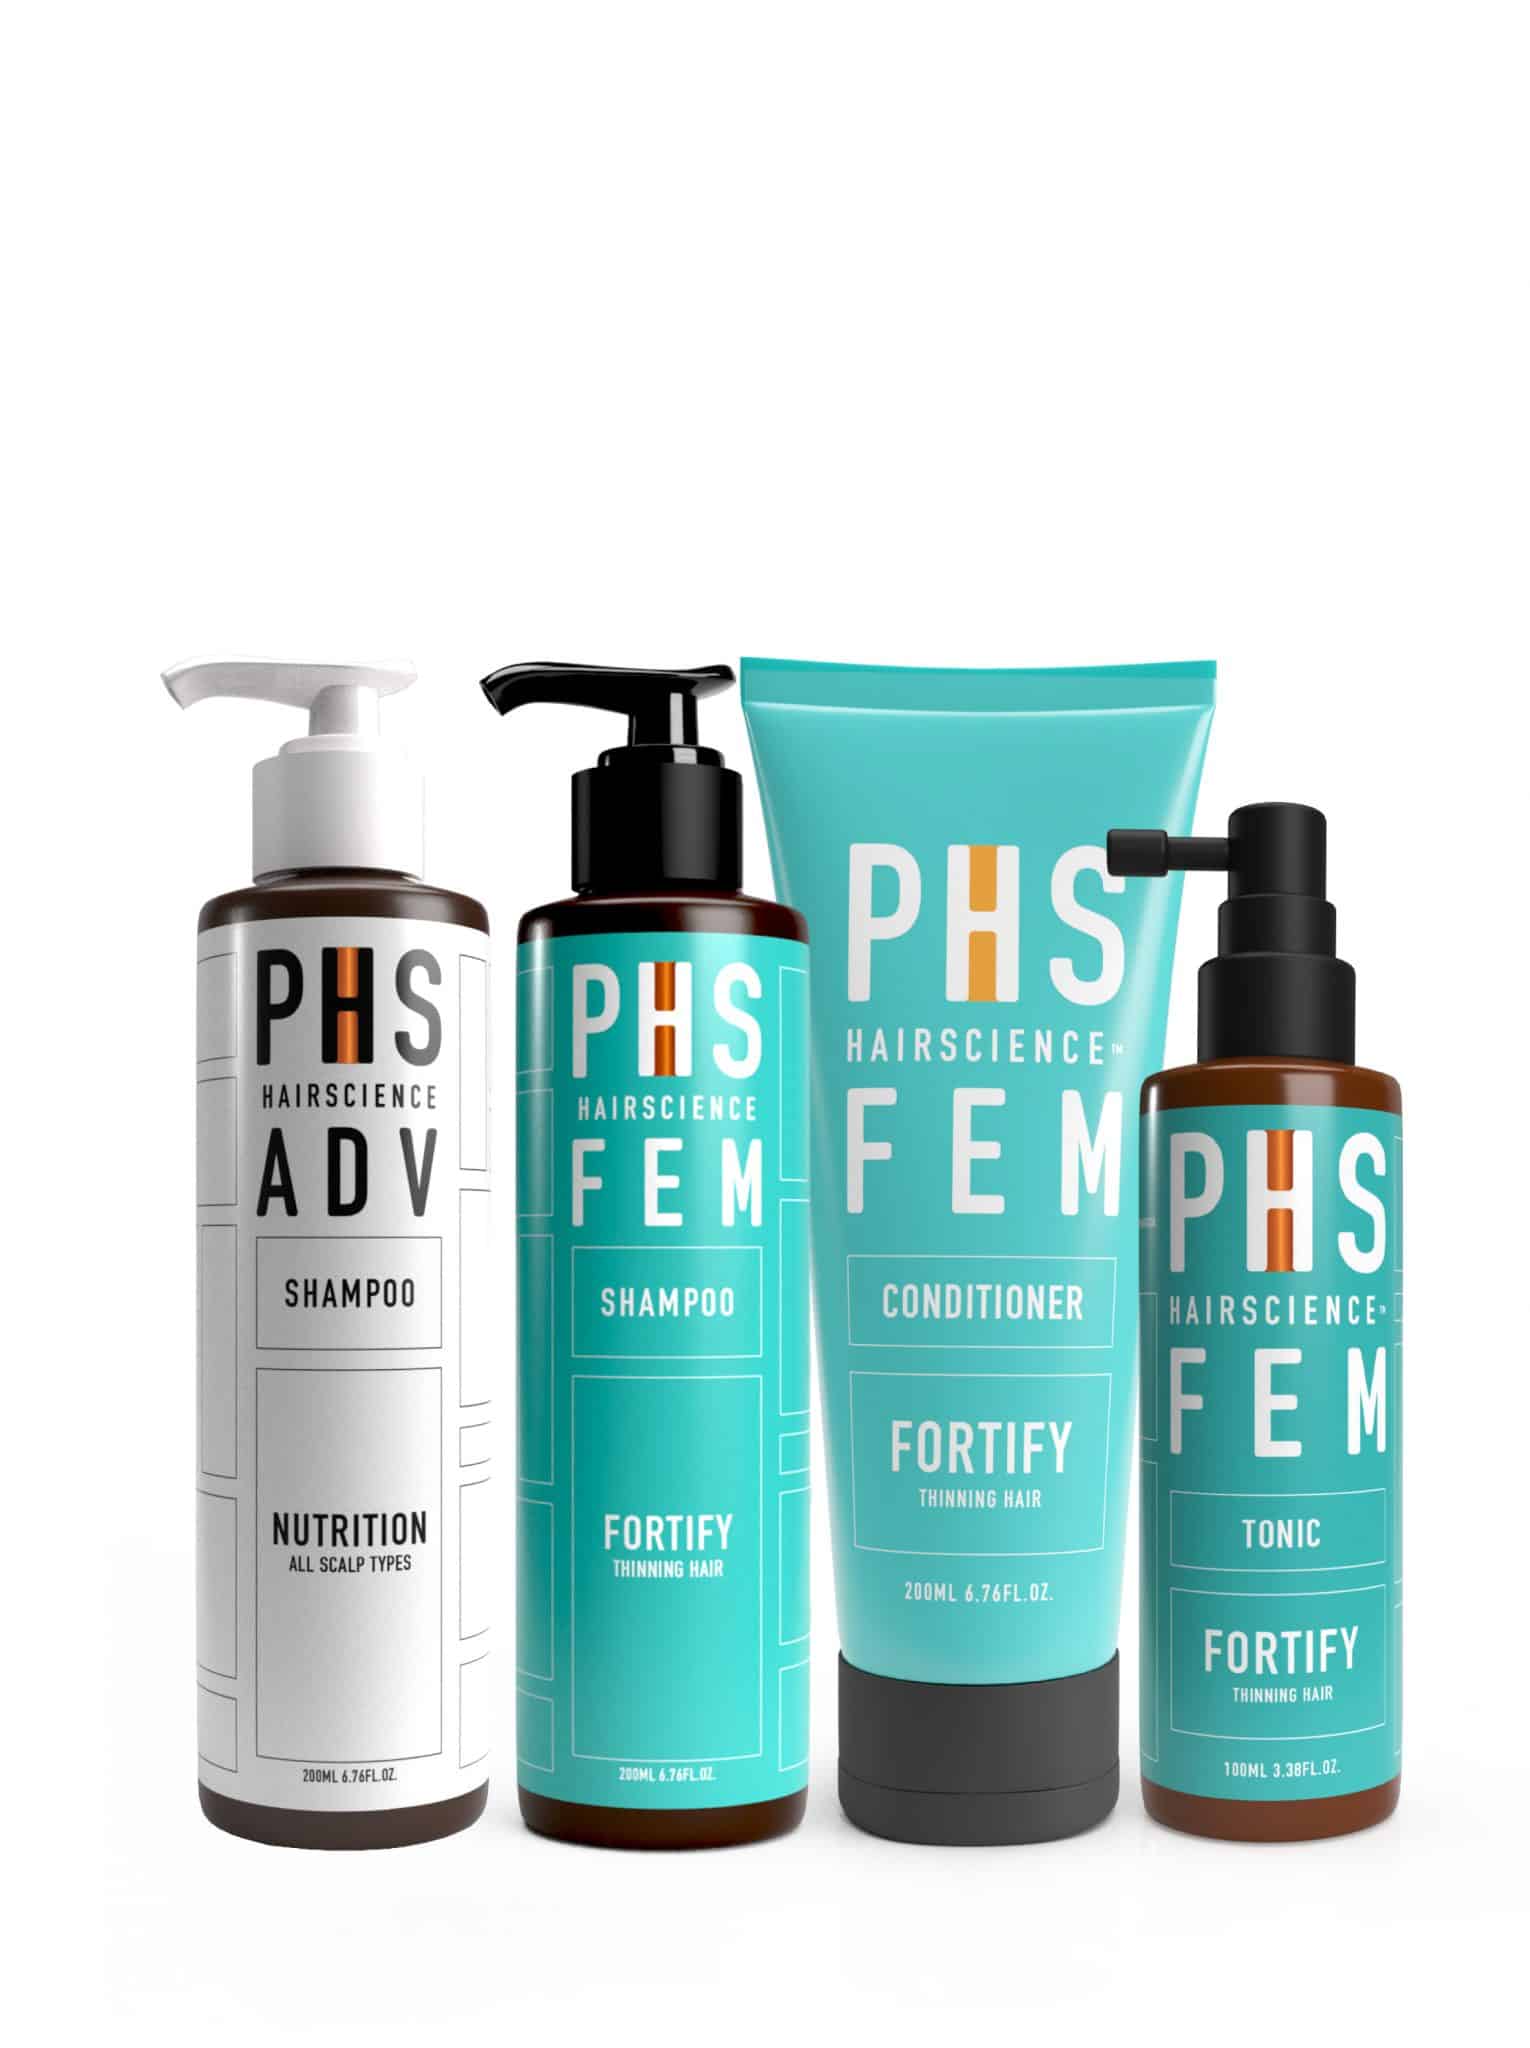 Signature Daily Regime | Treat Scalp Issues | PHS HAIRSCIENCE®